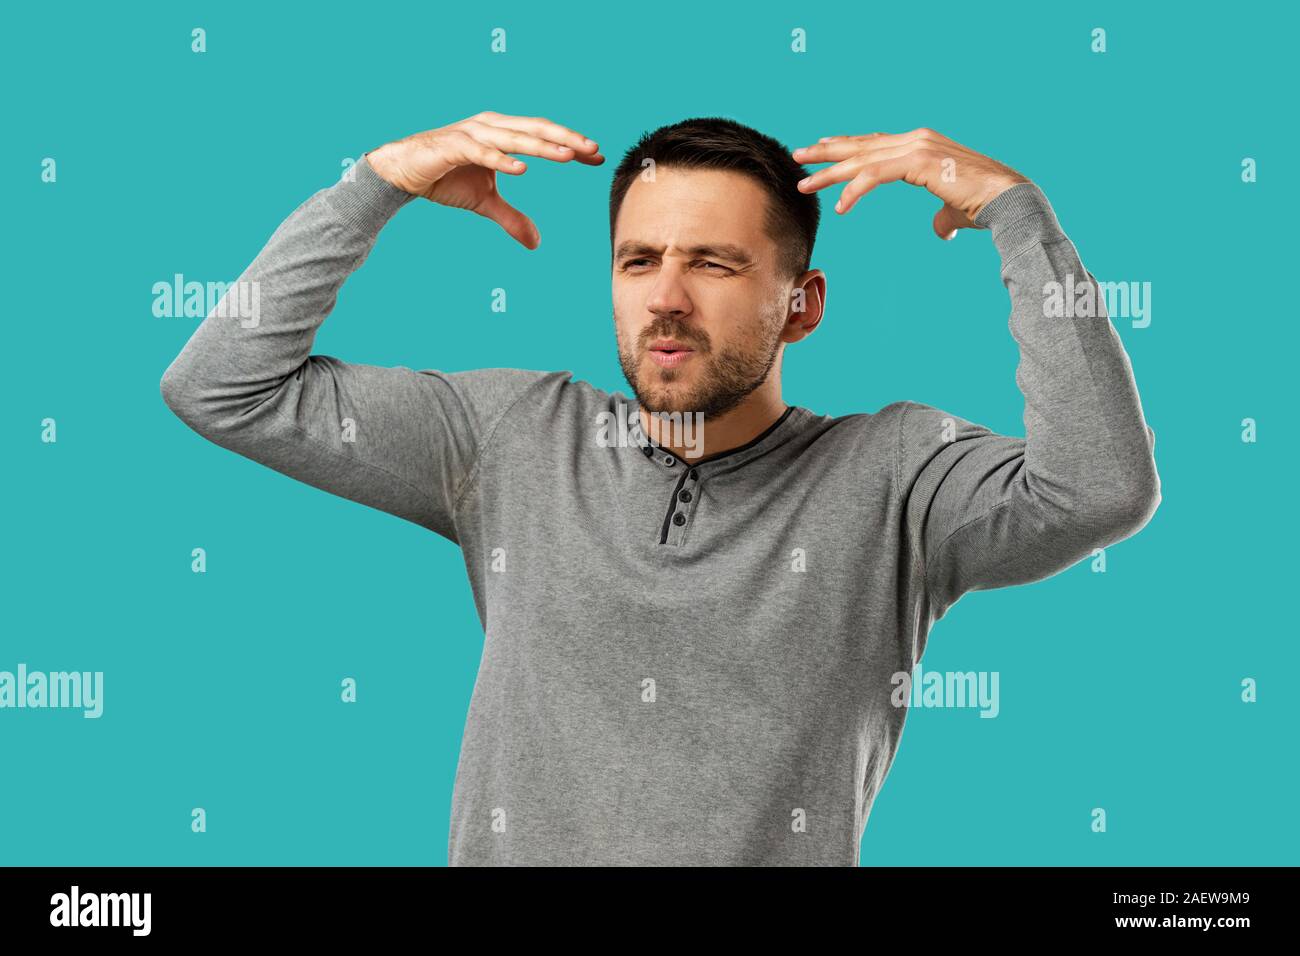 portrait of furious enraged bearded man shouting and screaming isolated on blue background Stock Photo